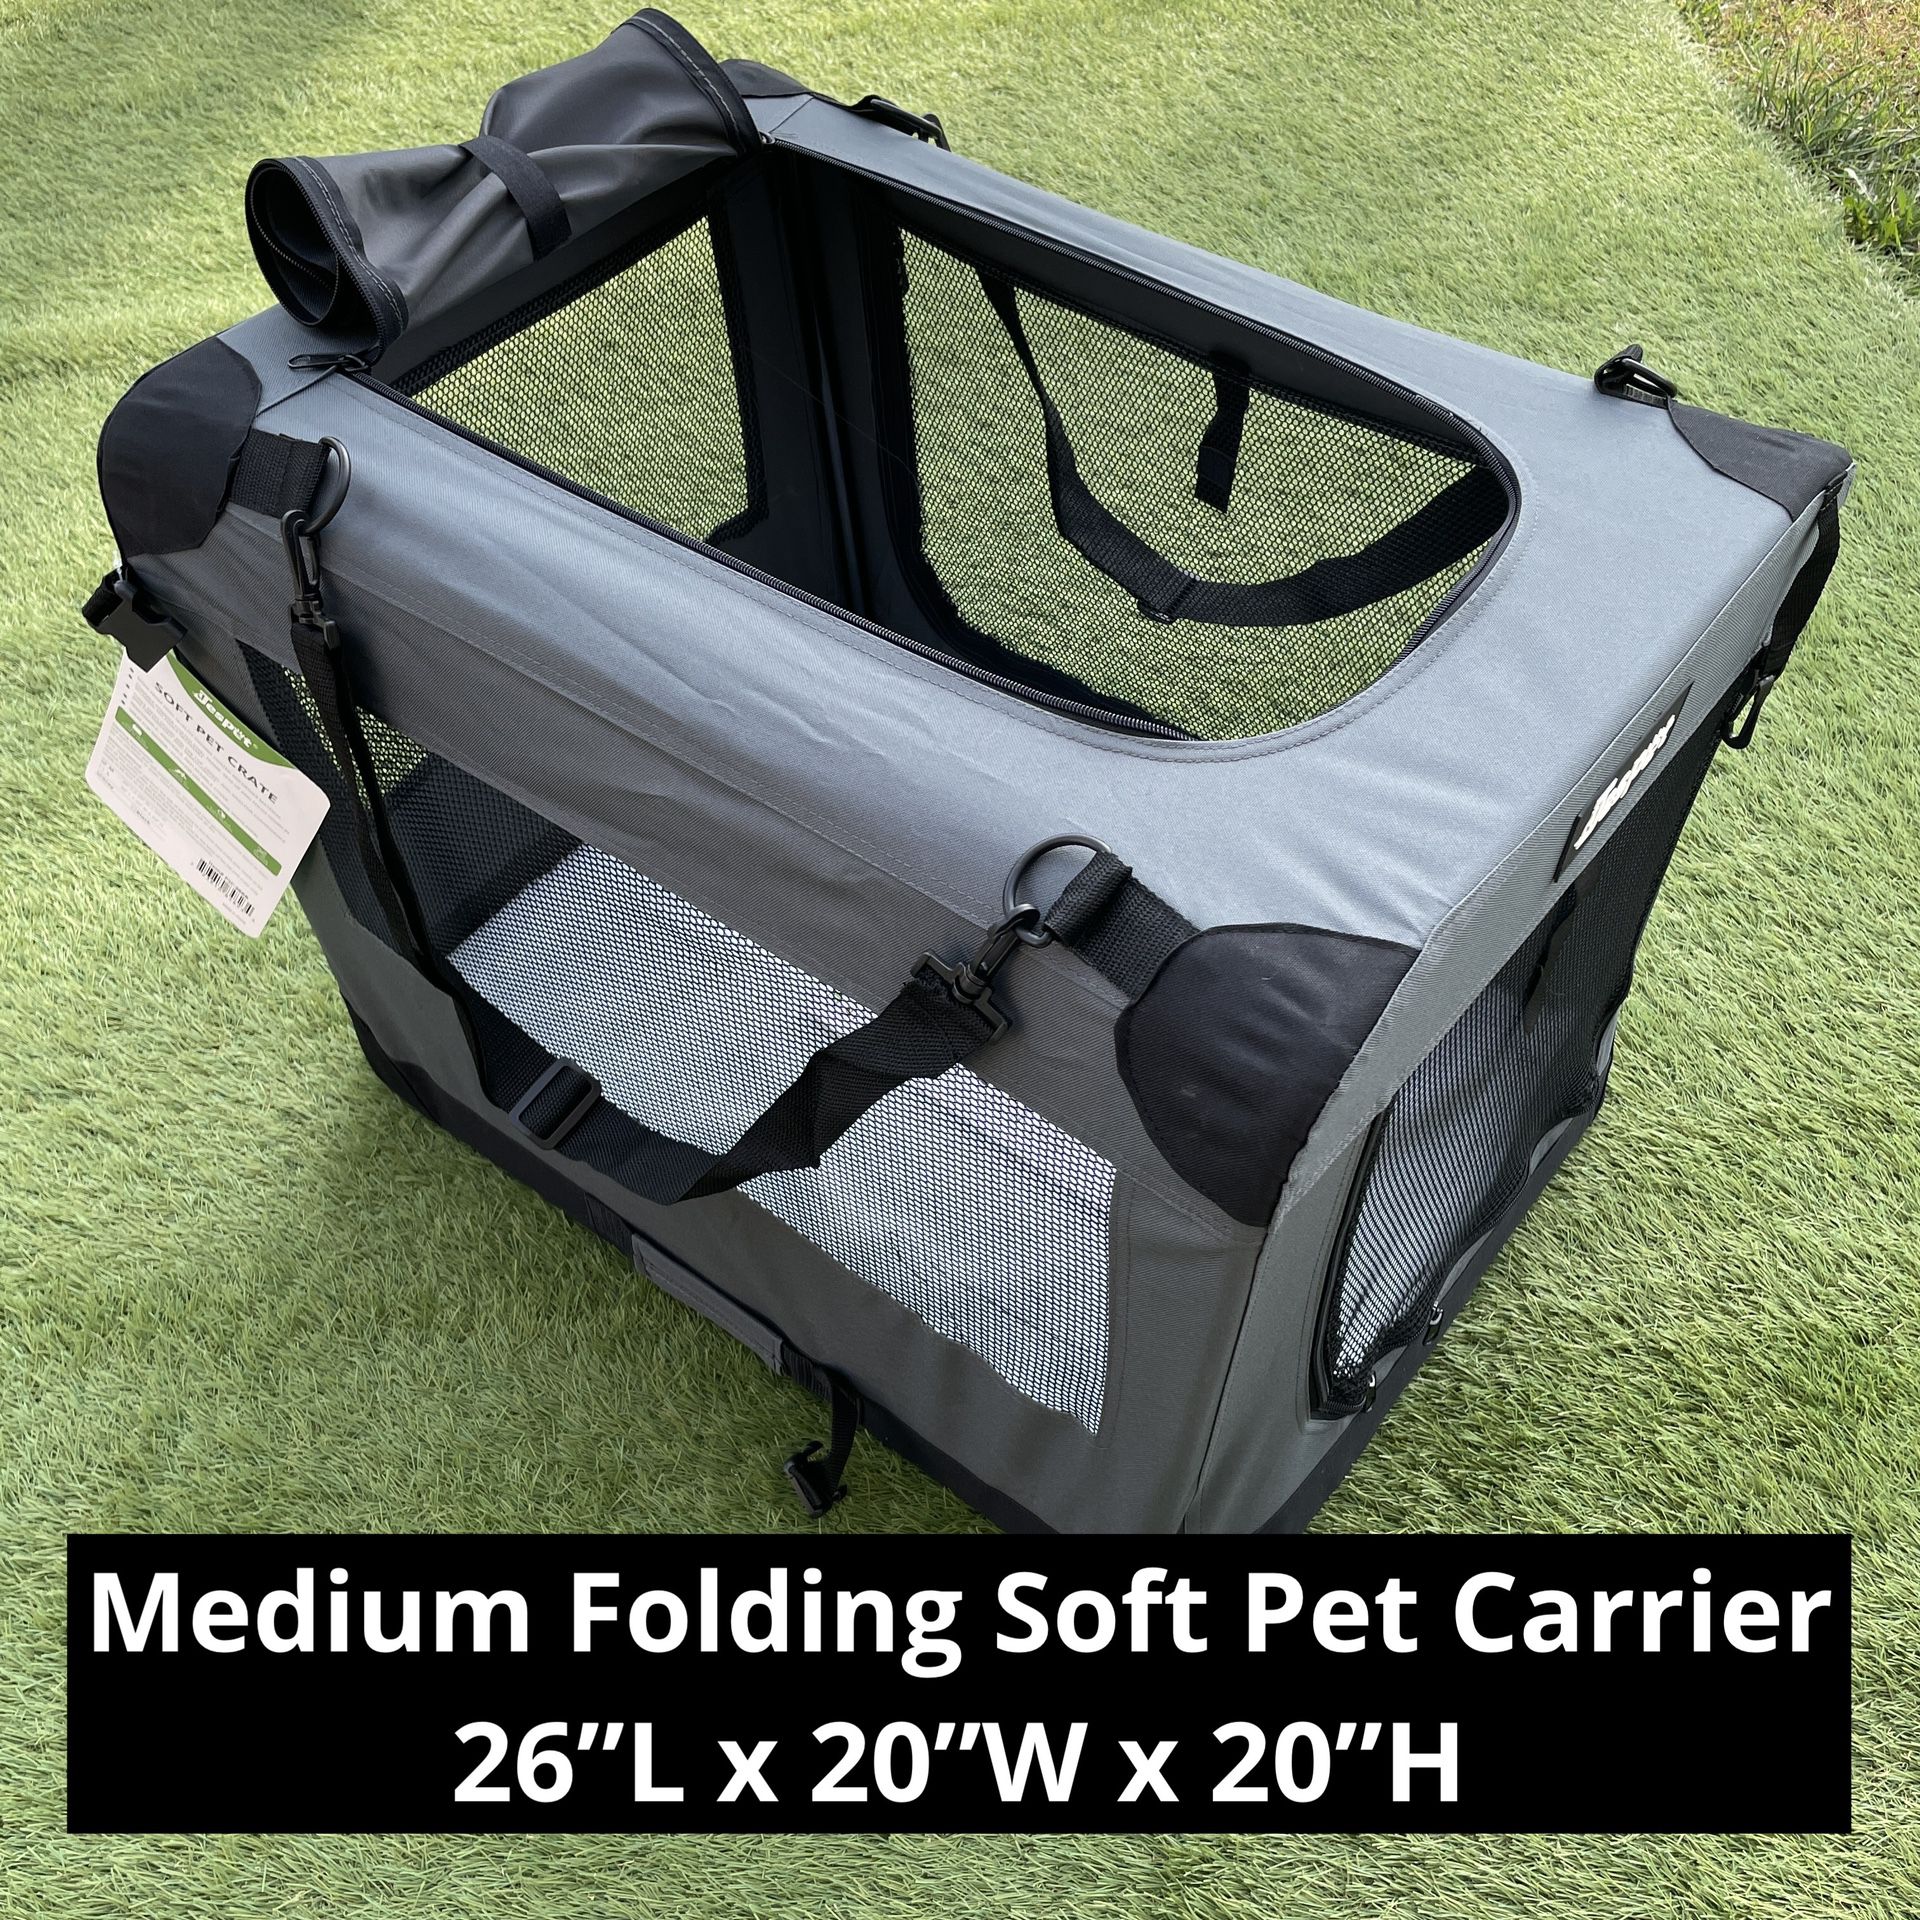 New Medium 26x20x20”H Collapsible Pet Soft Crate Carrier Portable Dog Cat Travel Cage